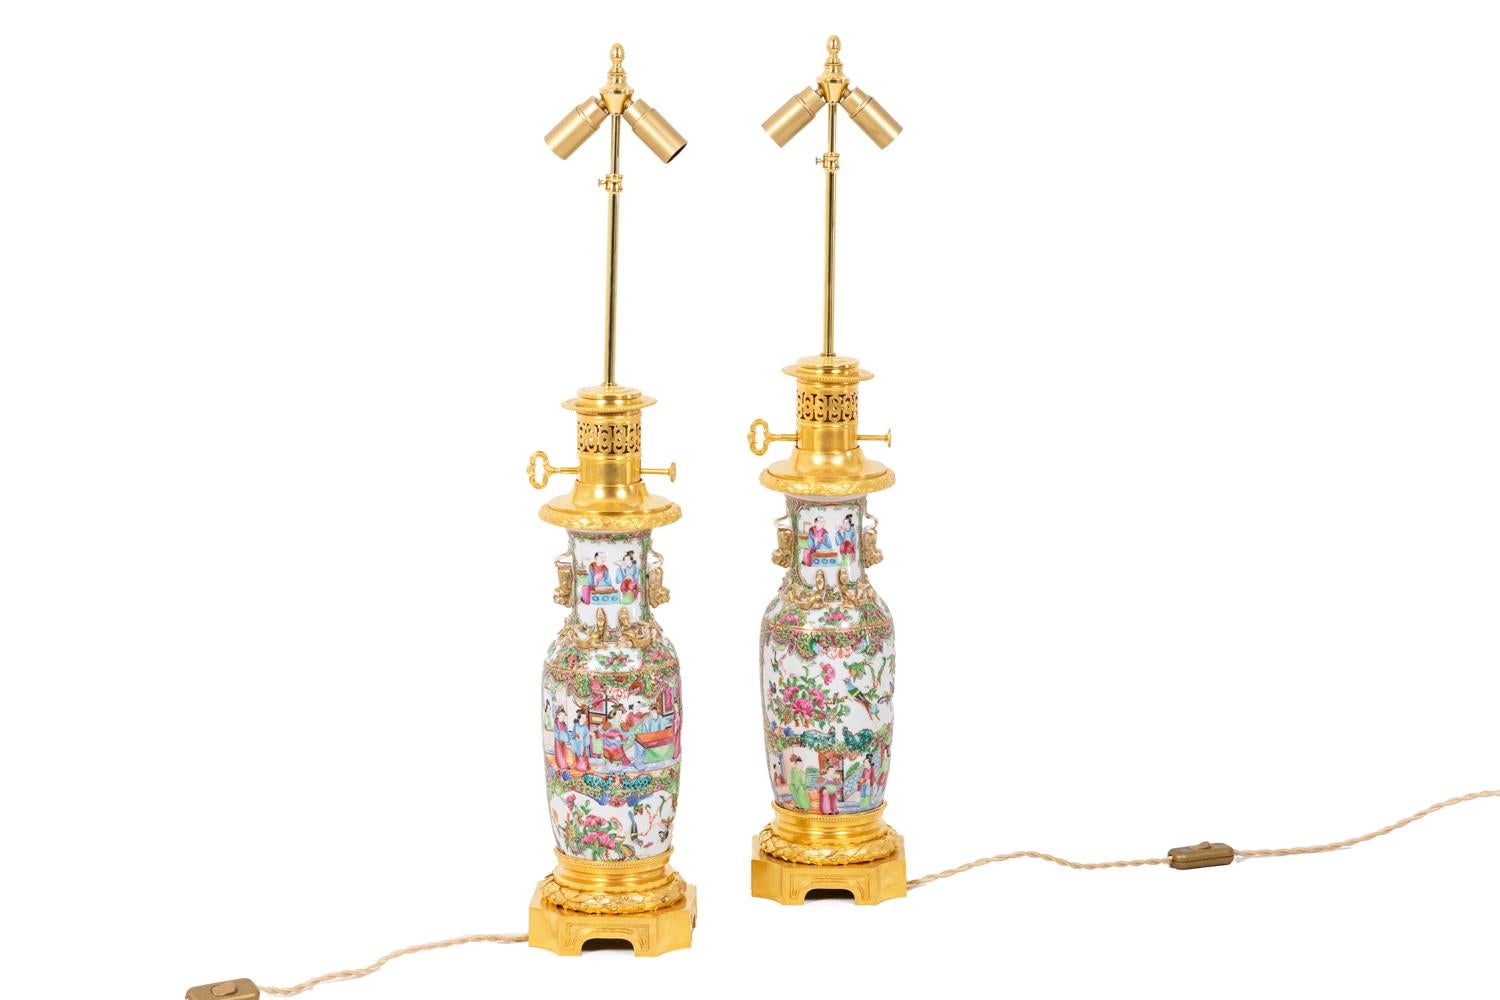 Pair of lamps in Canton porcelain and bronze. Ceramic adorned with characters, in shades of green, yellow, pink. Frame in gilded and chiseled bronze, the top presenting an openwork grid and the quadripod base of concave shape.

Travail réalisé